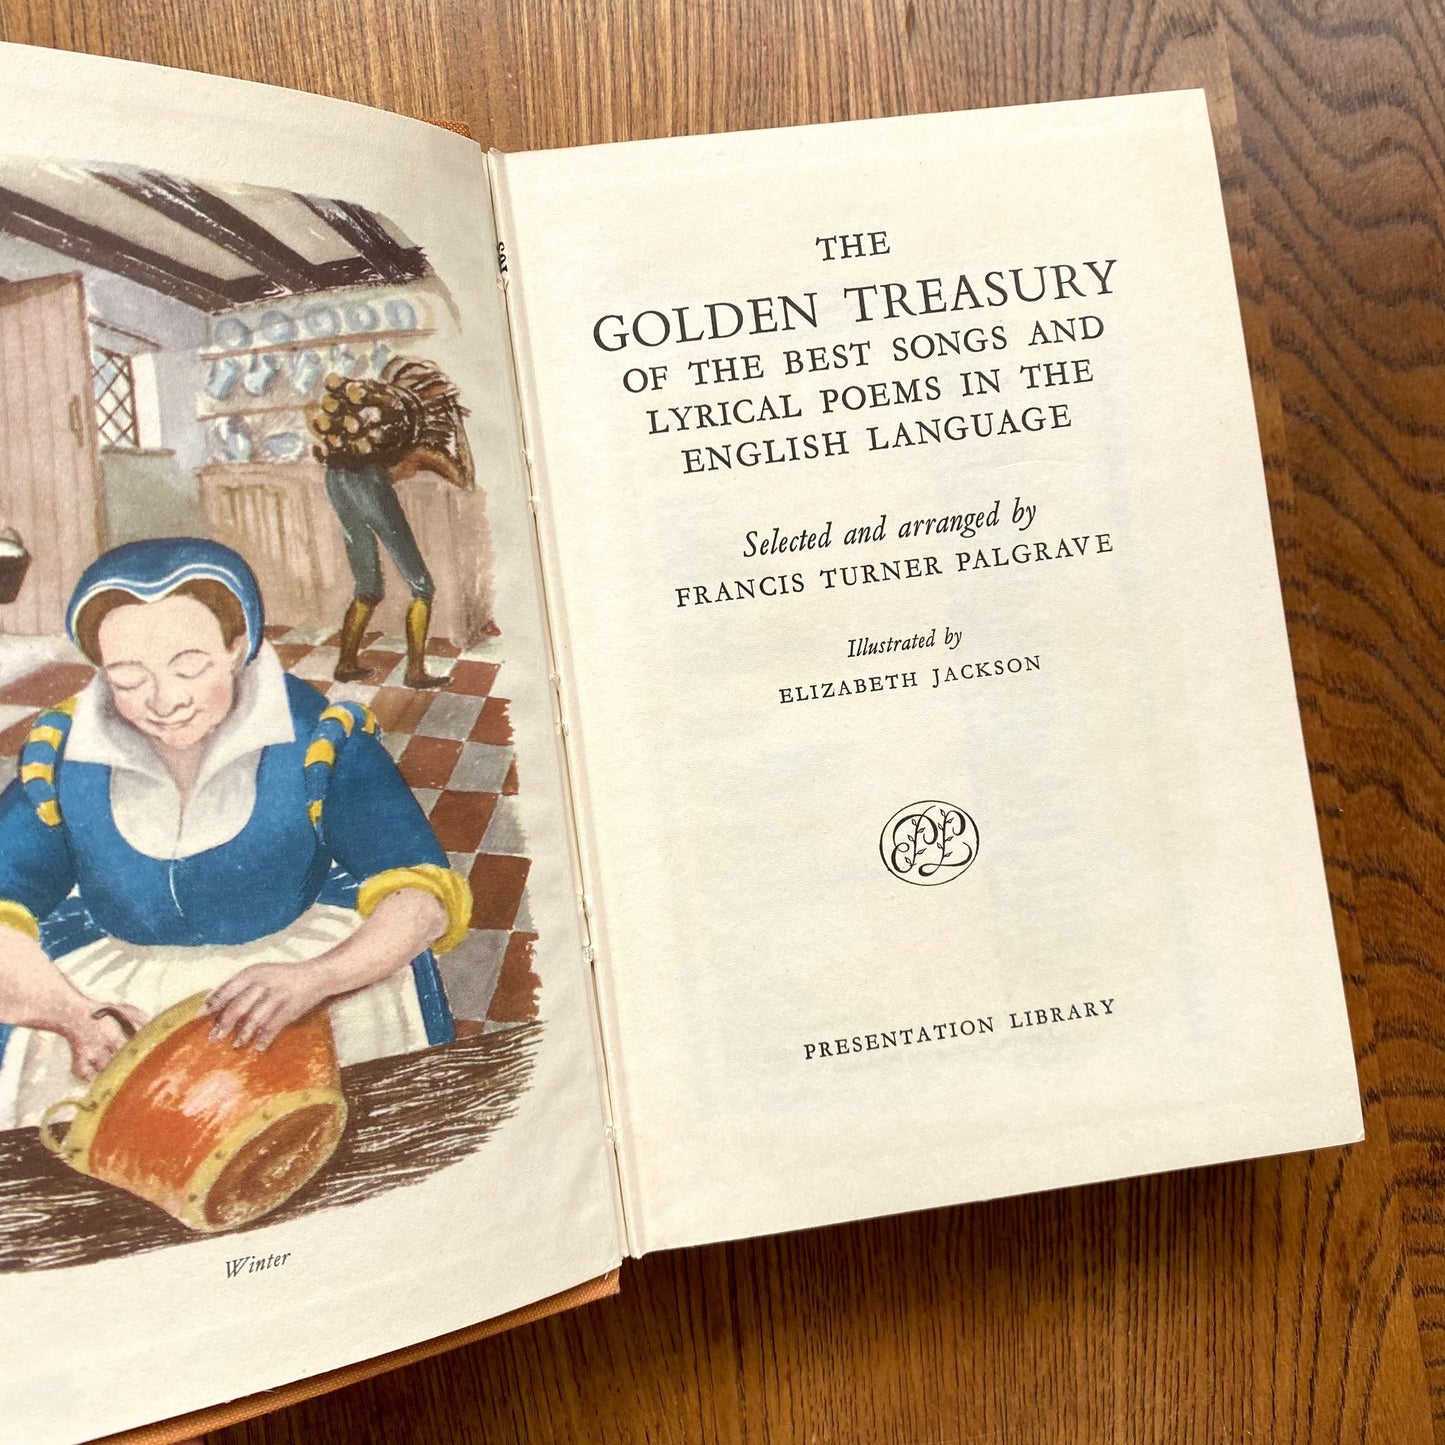 The Golden Treasury of the Best Songs and Lyrical Poems in the English Language